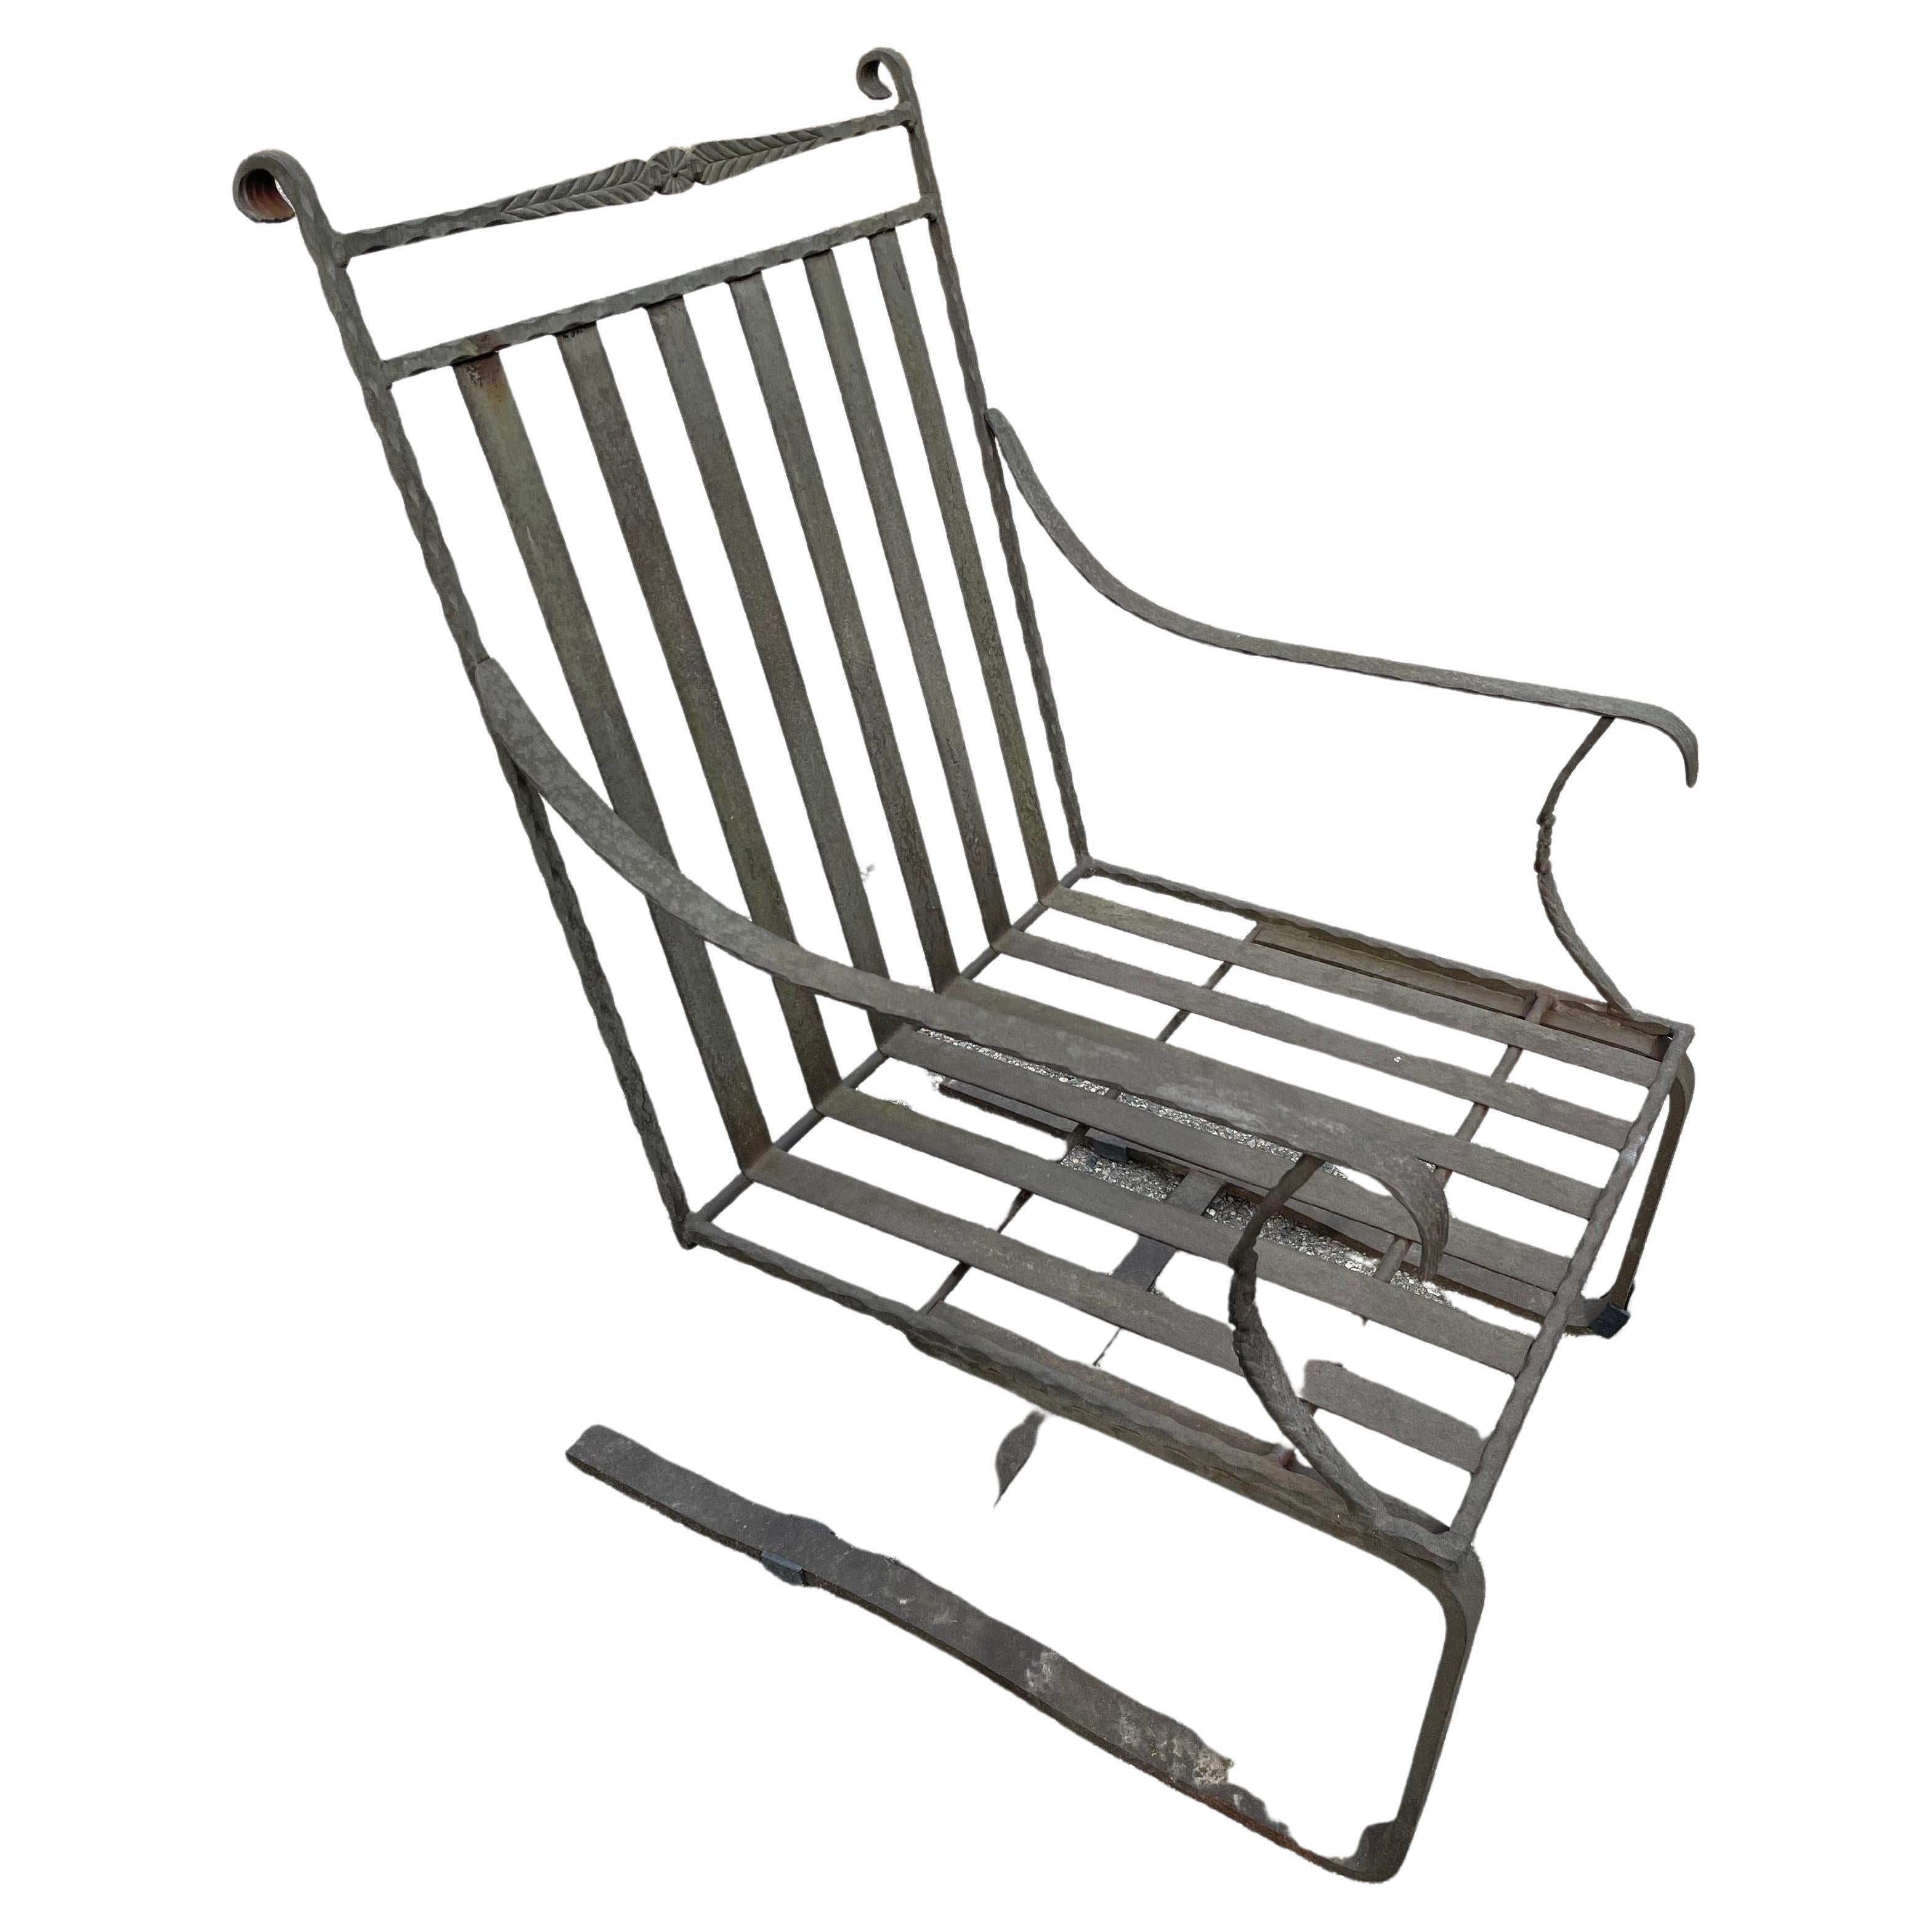 Wrought iron deep seated lounge chairs-a set of 4

In stock and ready to ship are a set of 4 generously seated wrought iron arm chairs. These rocker style chairs are perfect to relax in on your deck, garden, or patio. Twisted iron detail on